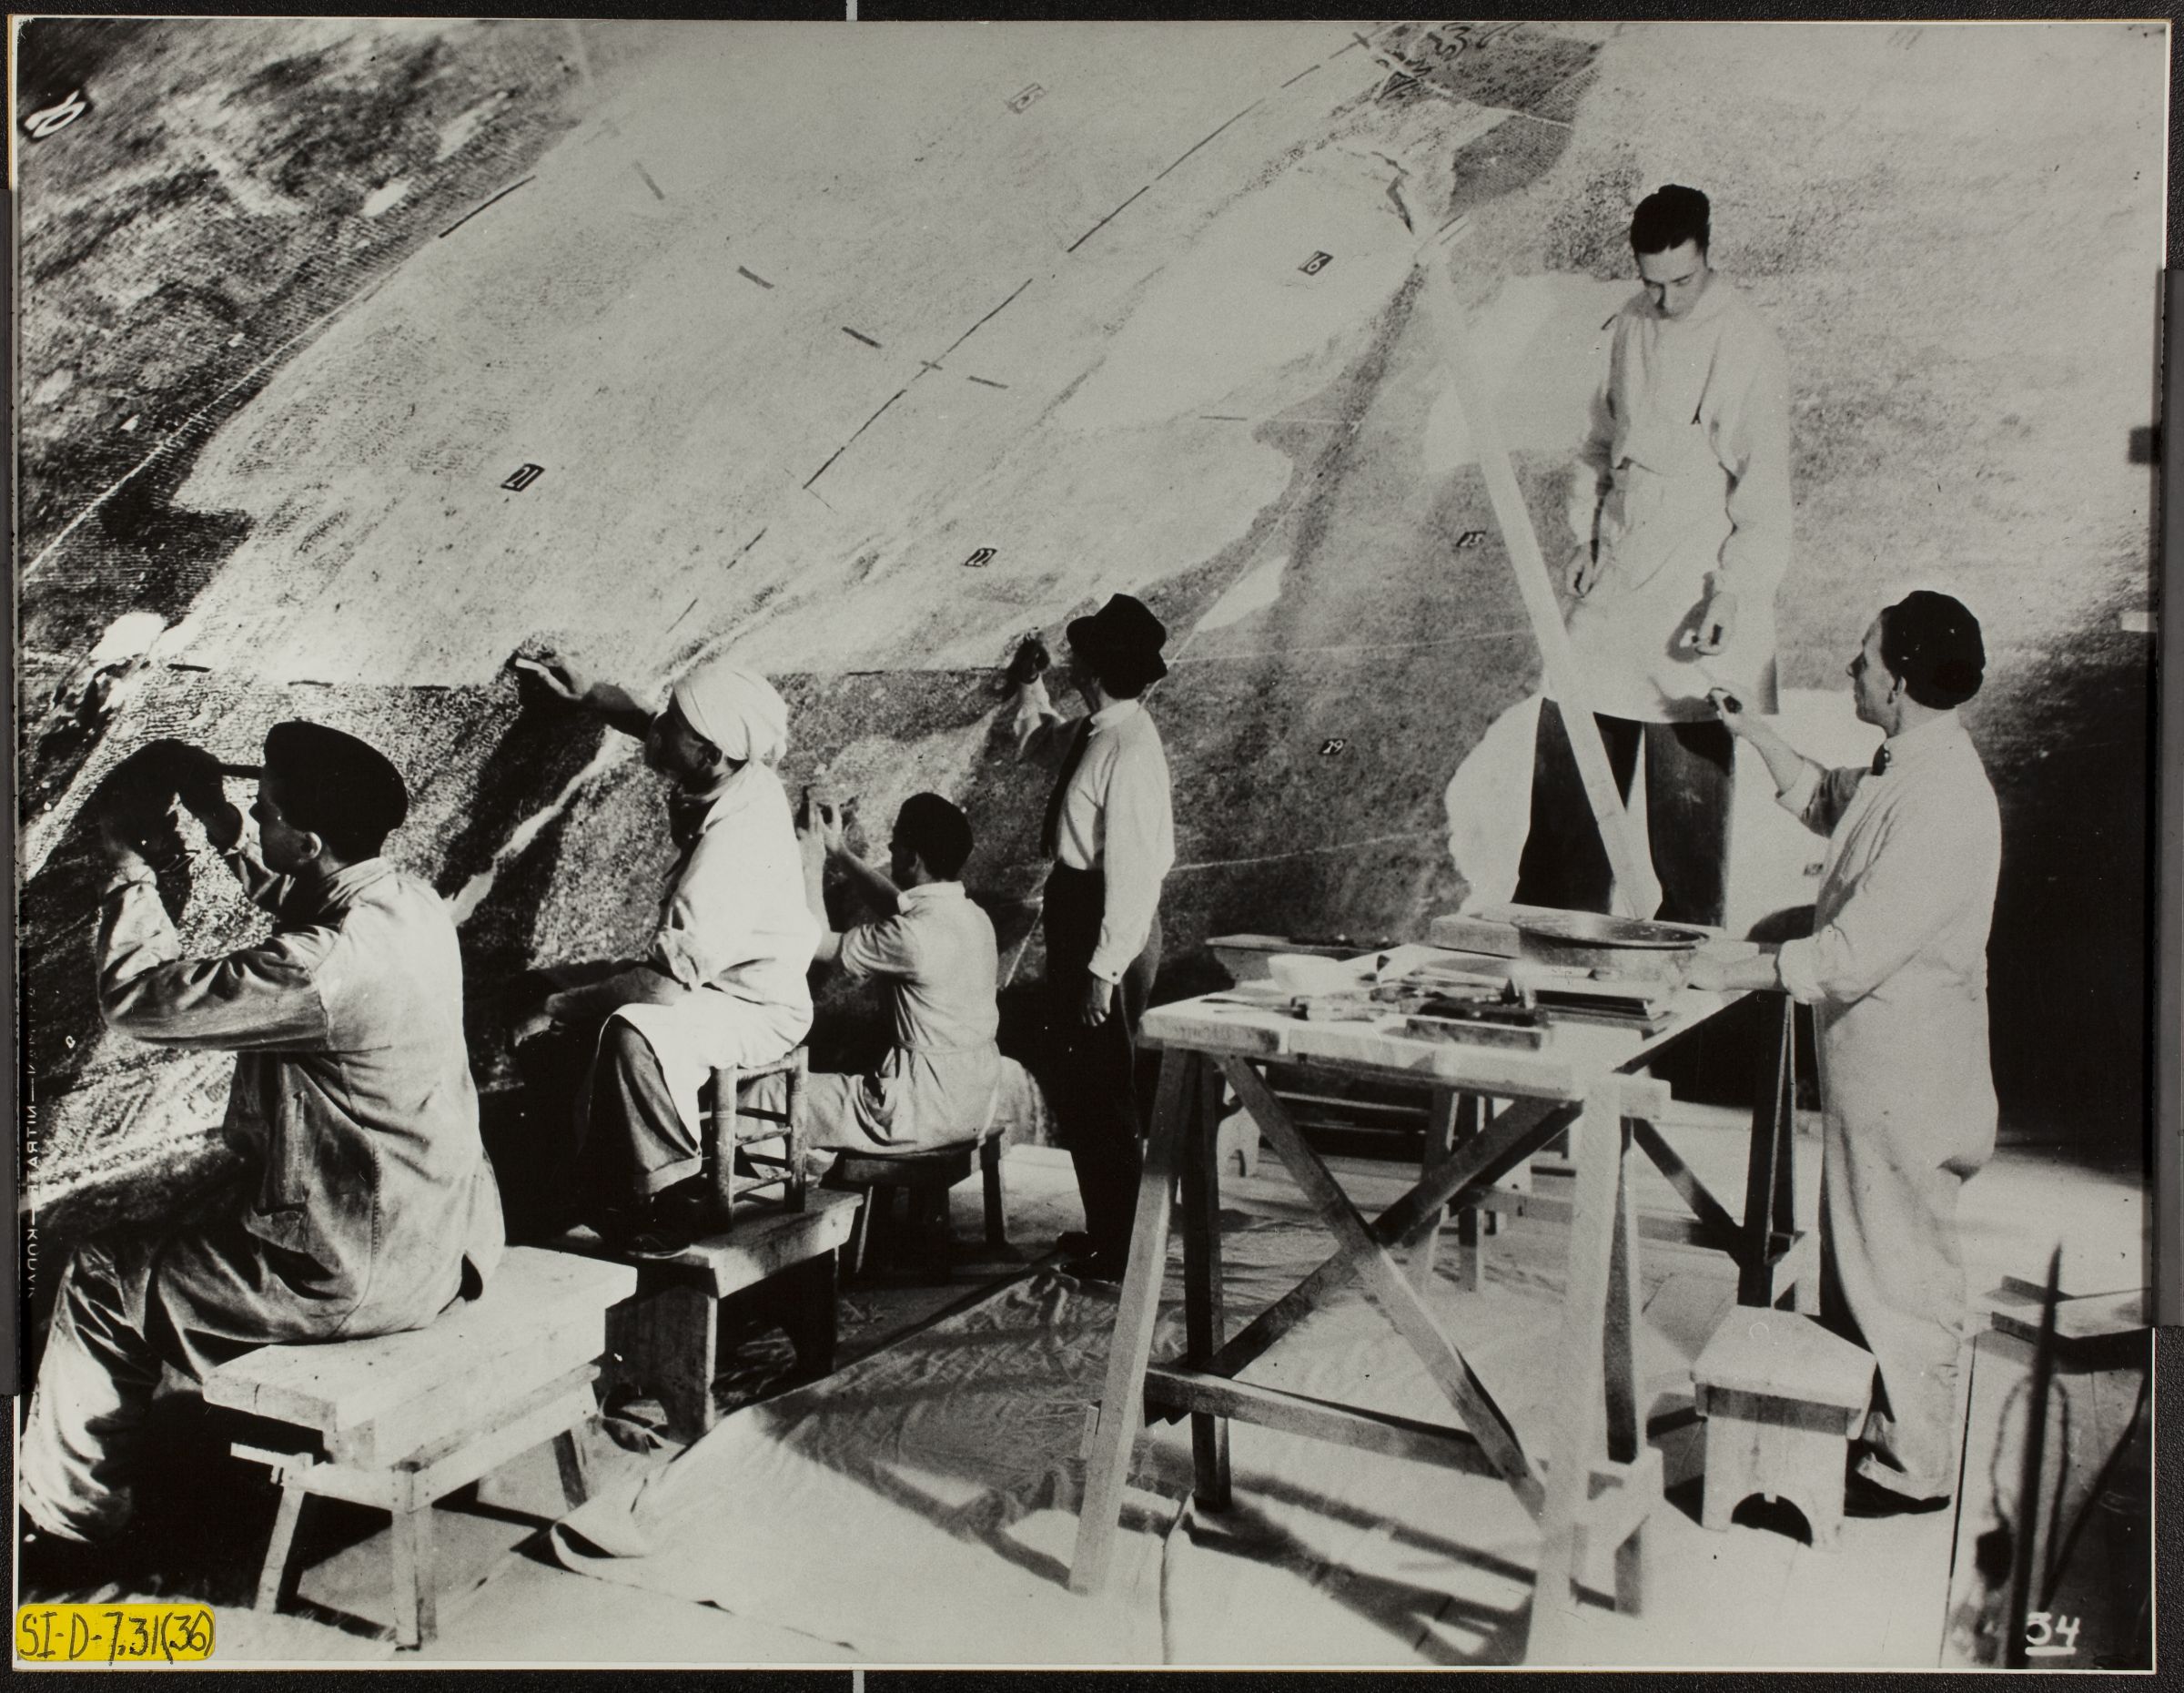 Apse, group at work on scaffold. July 10, 1936